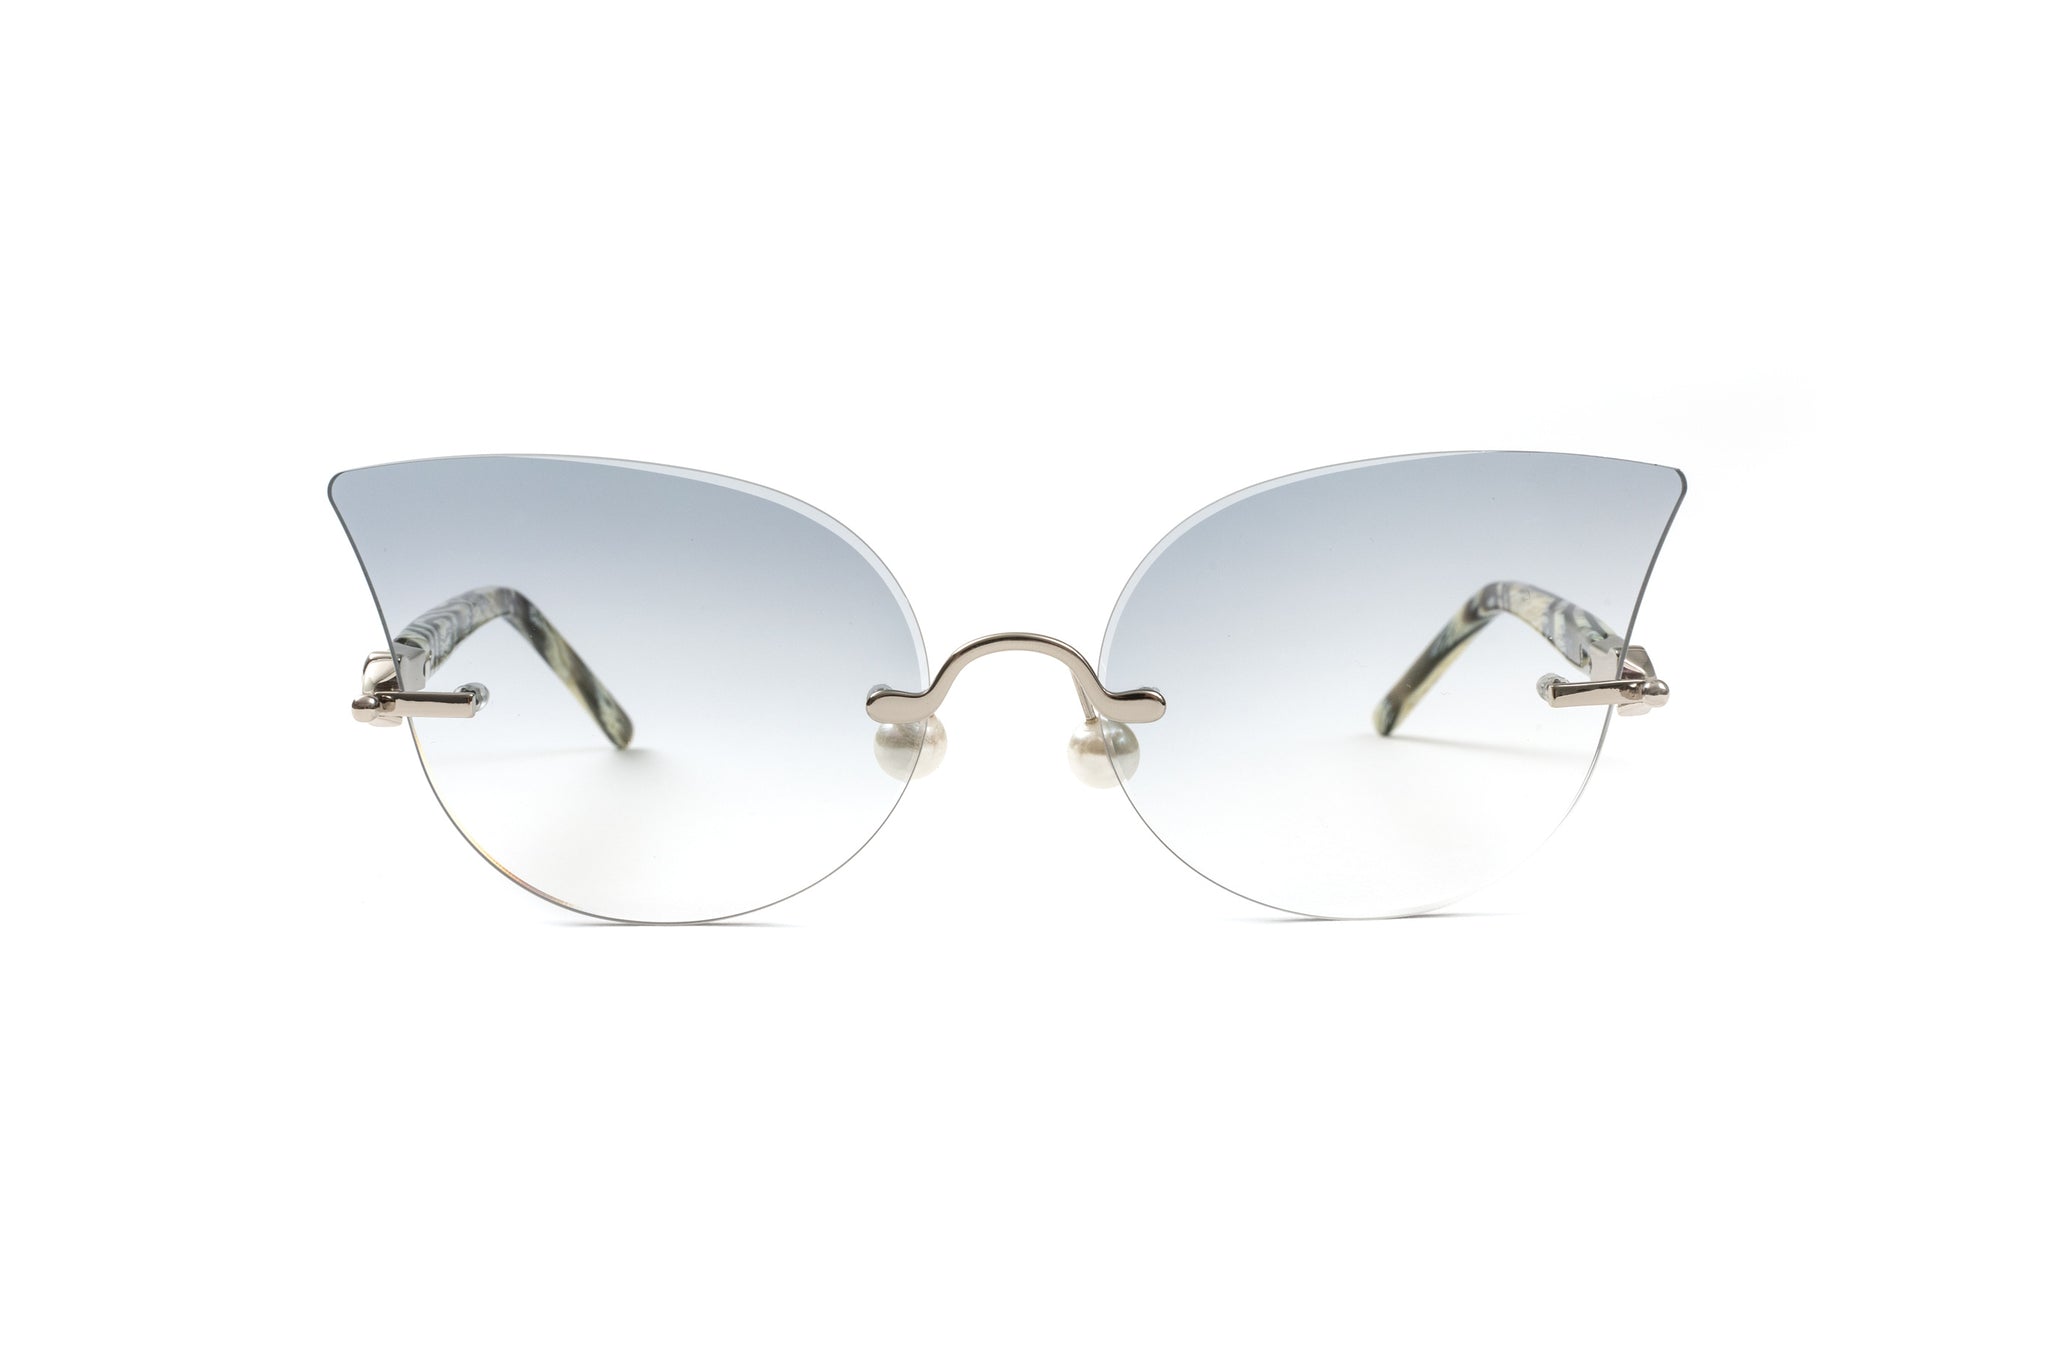 Cateye Silver Pearl Collection Sunglasses, Black and White Buffalo Horn Style Acetate